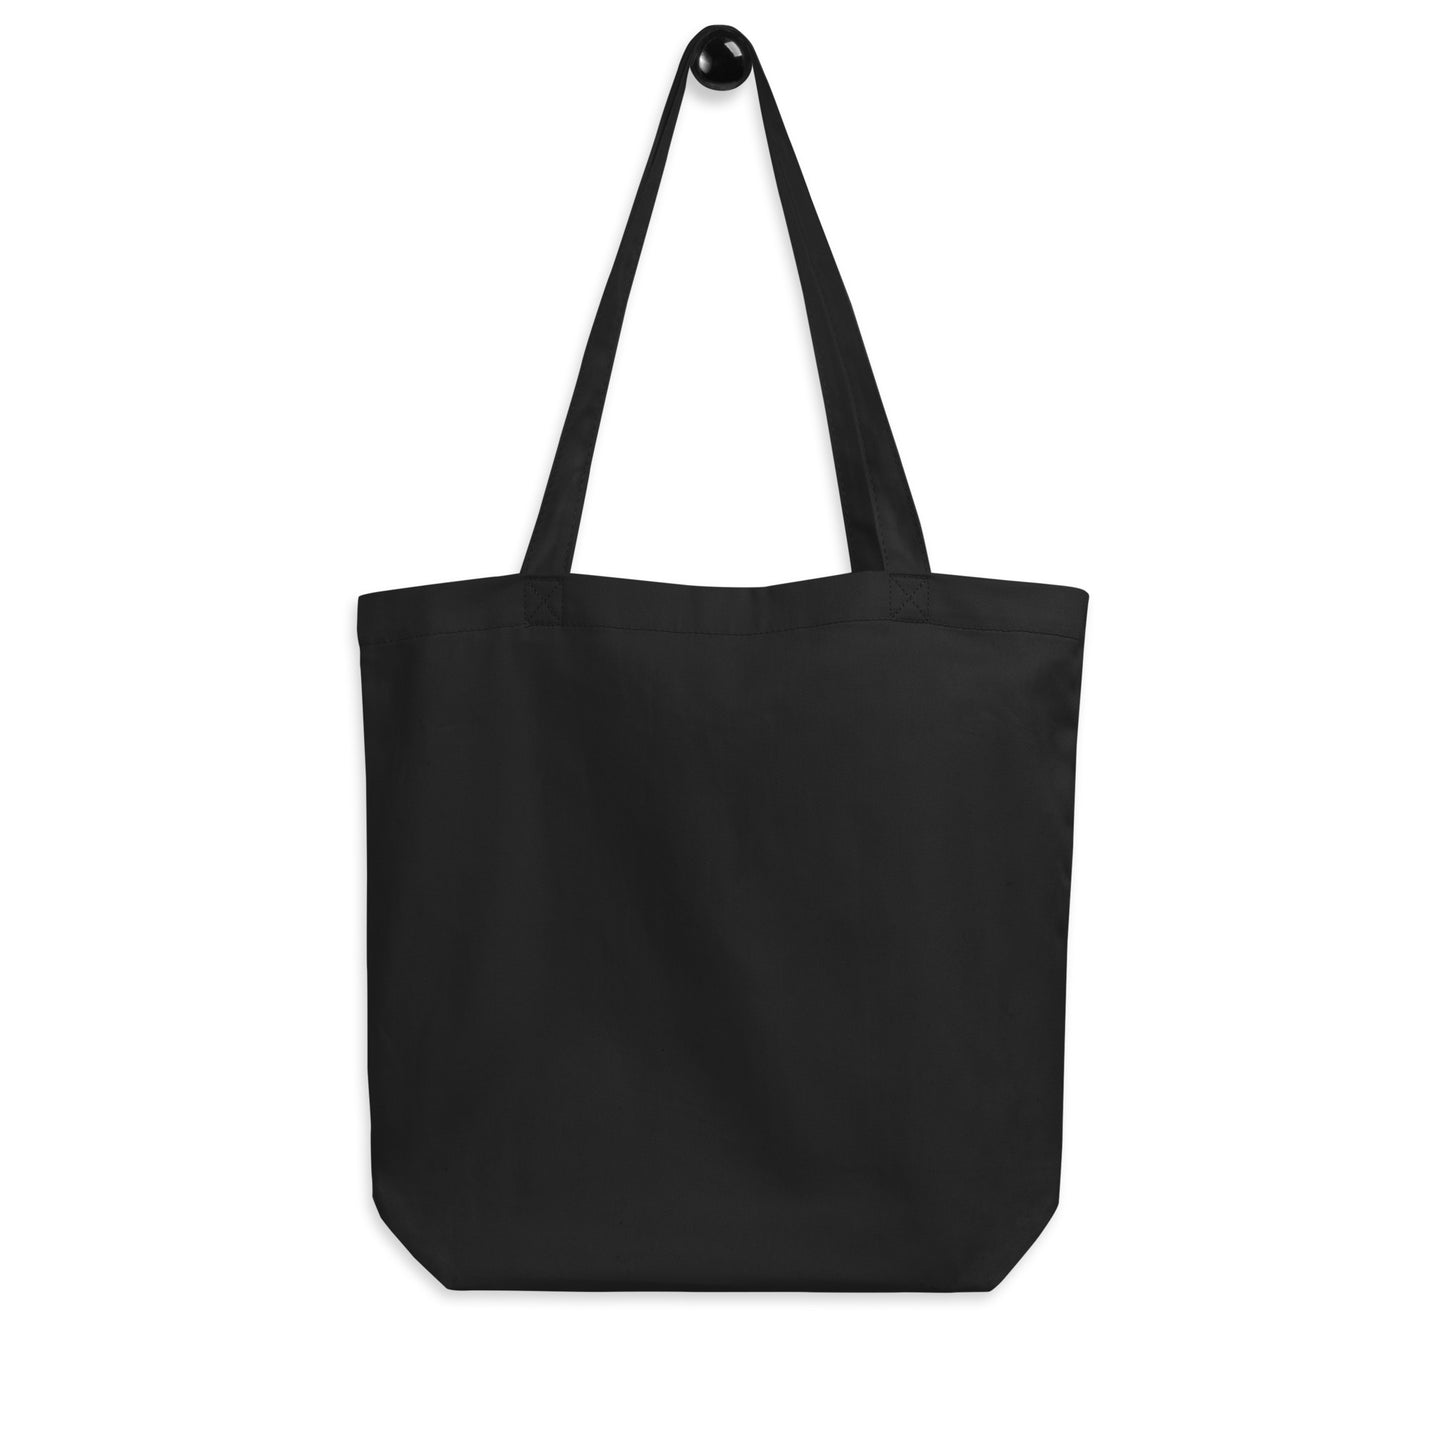 Unique Travel Gift Organic Tote - White Oval • HKG Hong Kong • YHM Designs - Image 05